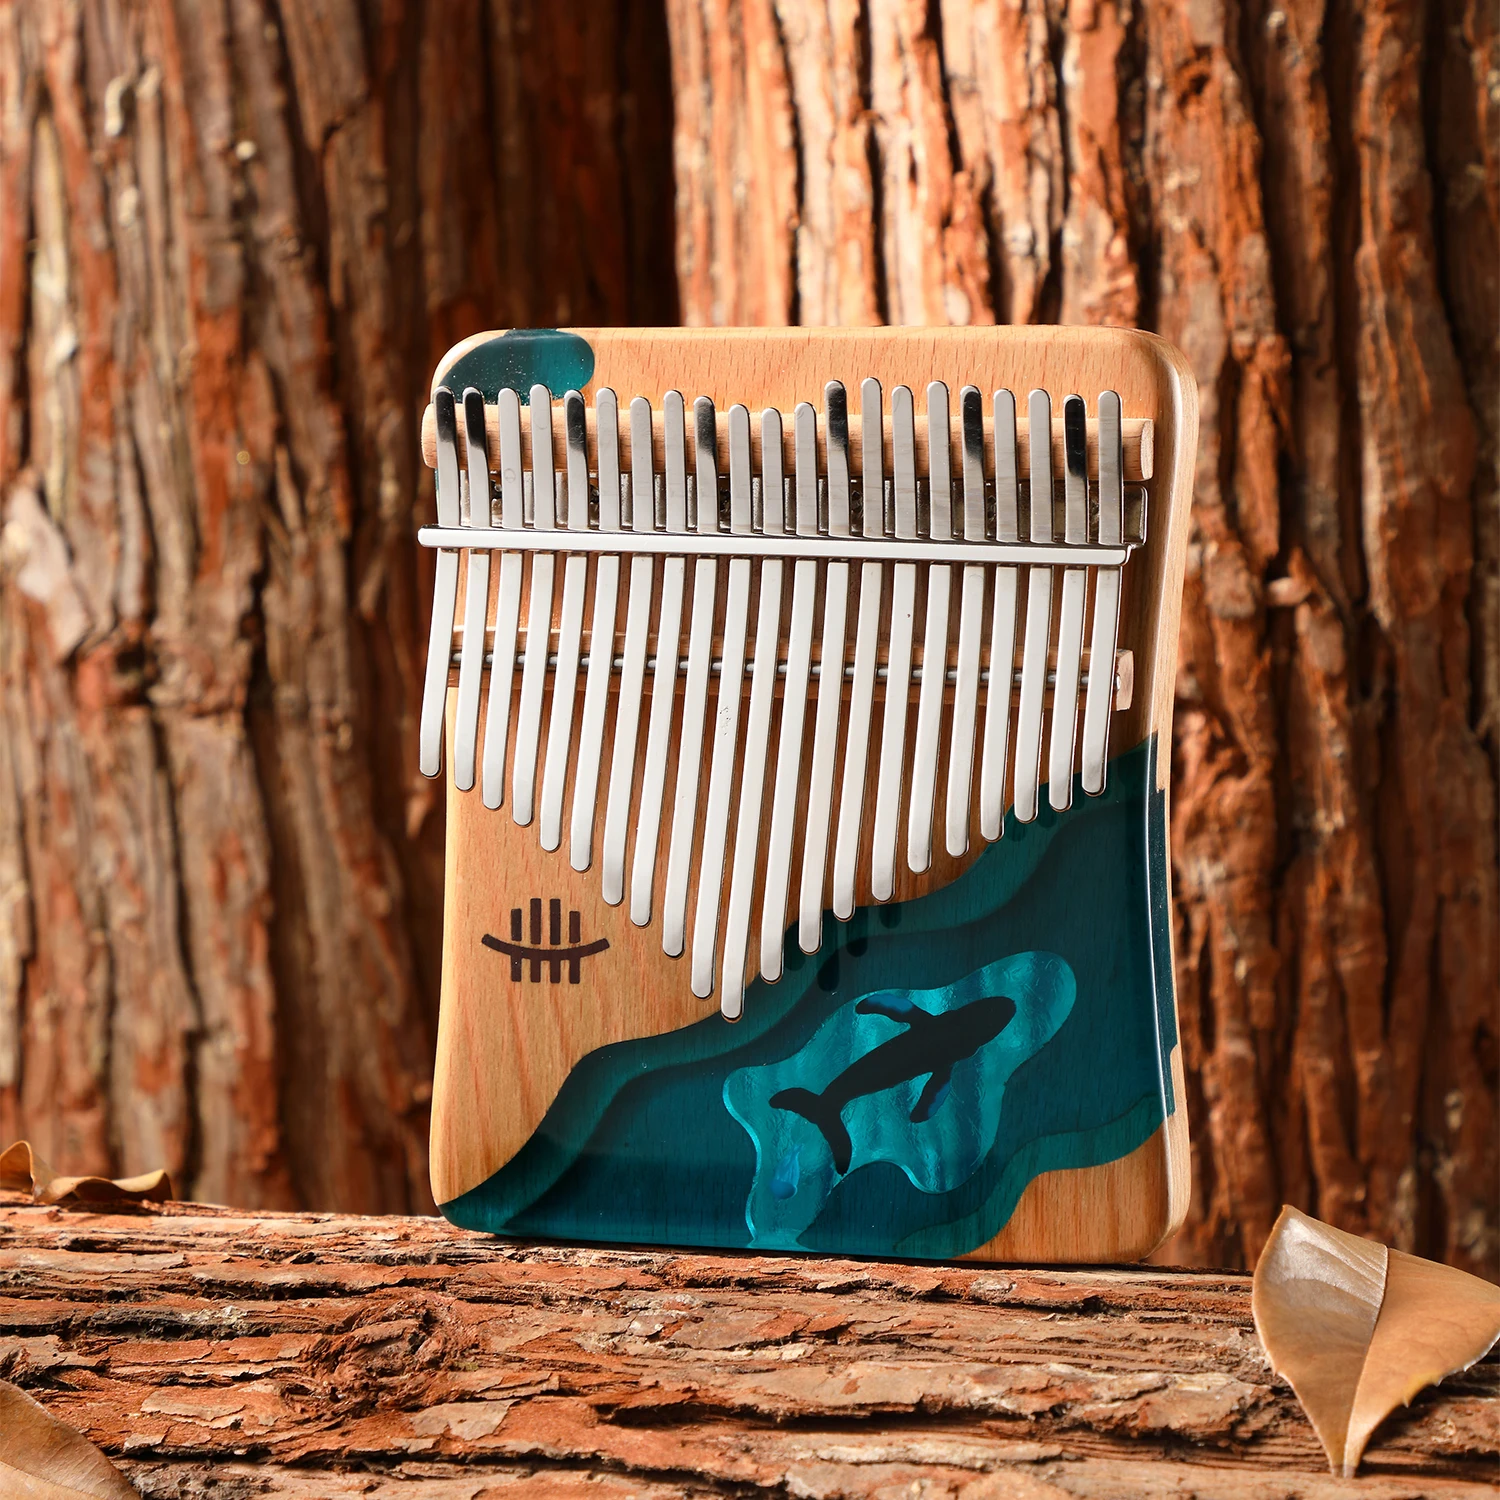 

Hluru Kalimba 21 Key Thumb Piano Beech Wood Finger Piano Musical Instrument Blue Ocean Whale Pattern for Kids Adults Beginners